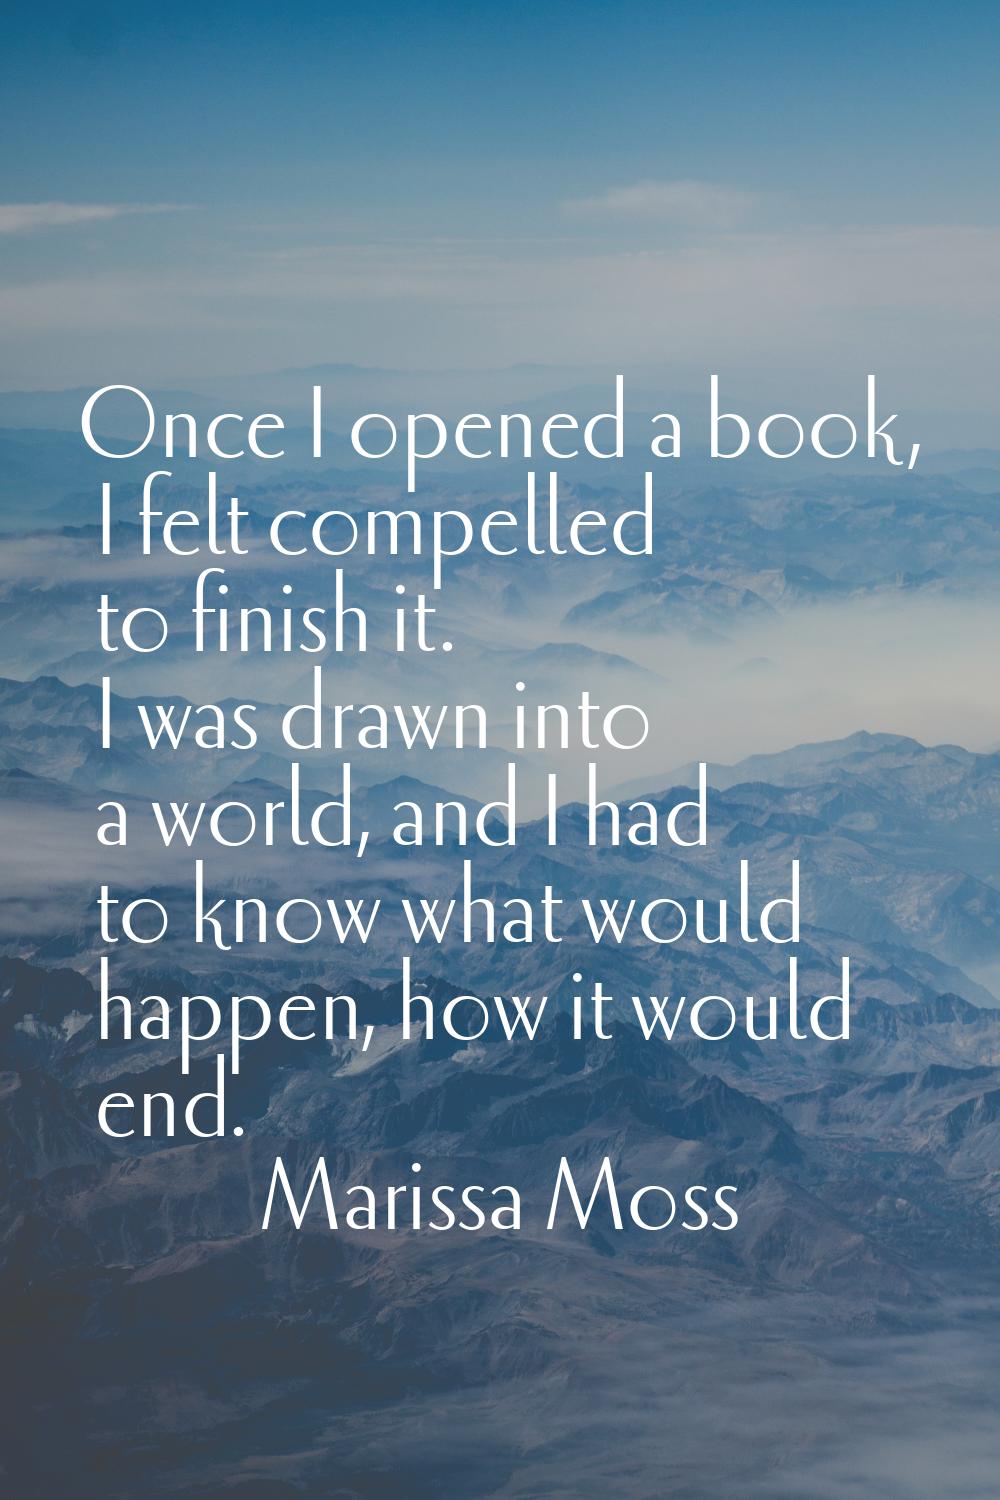 Once I opened a book, I felt compelled to finish it. I was drawn into a world, and I had to know wh